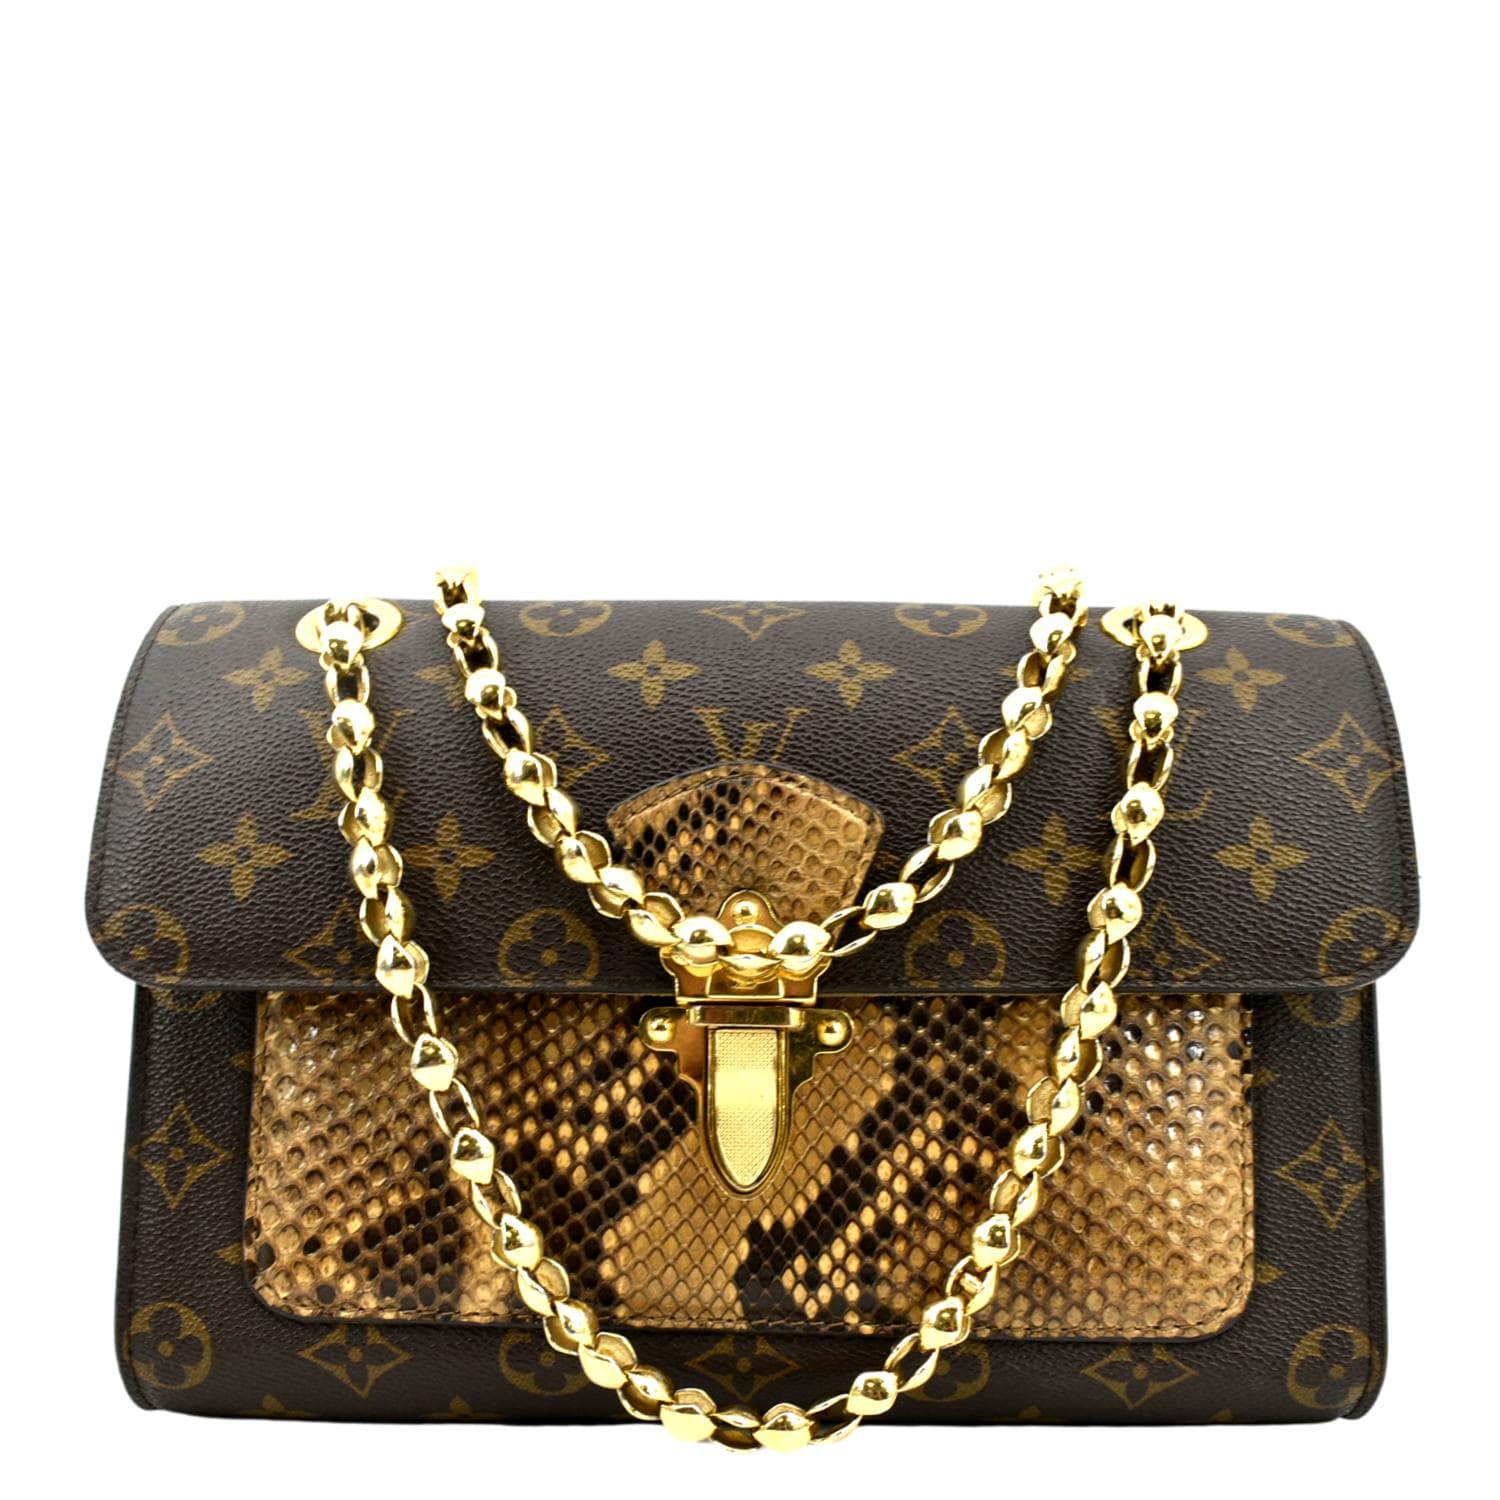 Victoire  Luxury bags collection, Bags designer fashion, Bags